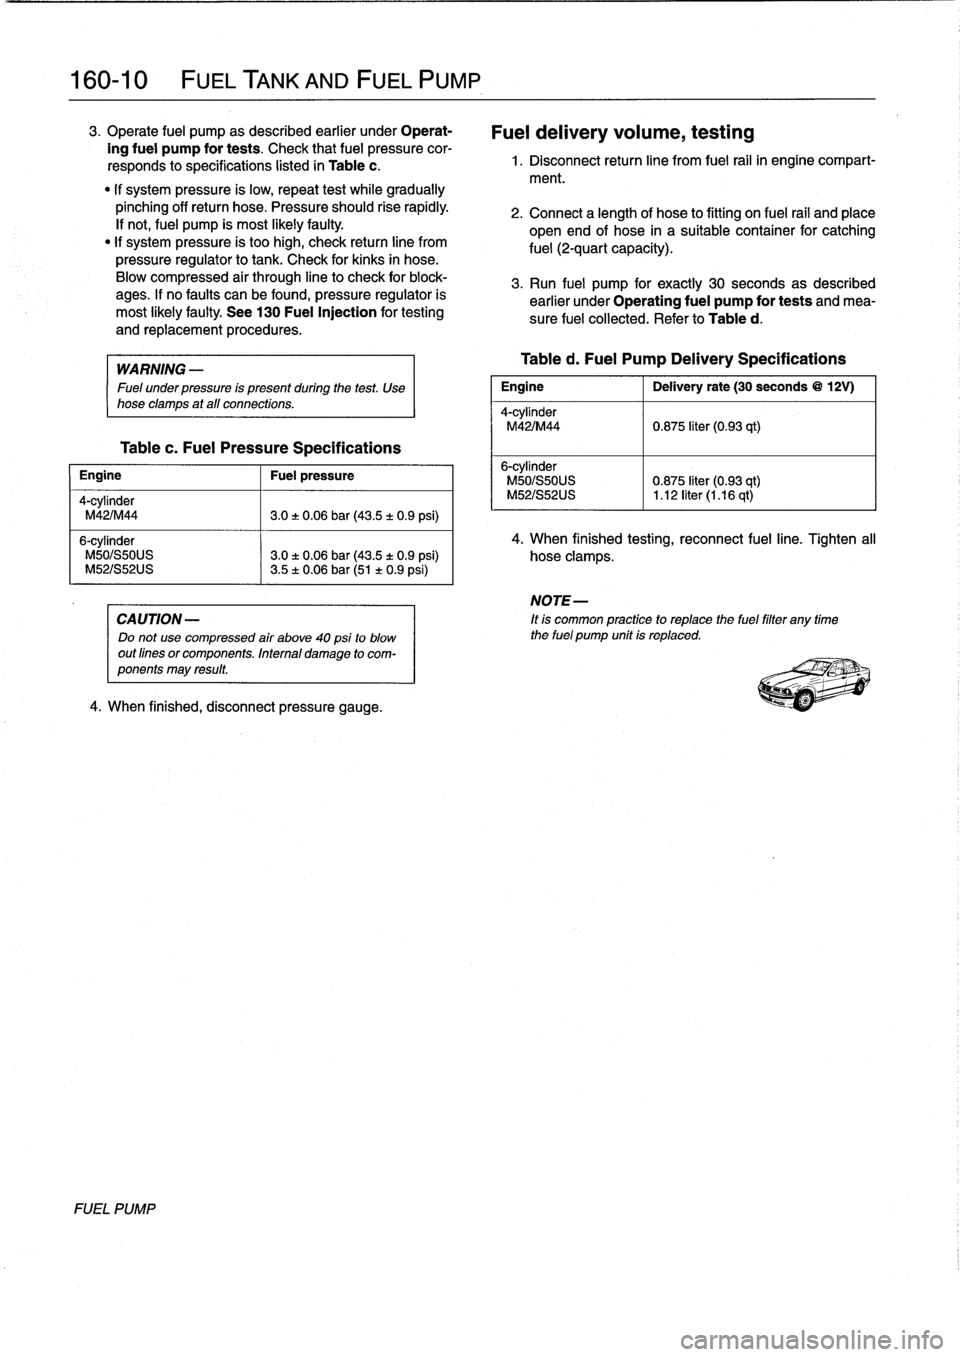 BMW 325i 1994 E36 Manual PDF 
160-
1
0

	

FUEL
TANK
AND
FUEL
PUMP

3
.
Operate
fuel
pump
as
described
earlier
under
Operat-

ing
fuel
pump
for
tests
.
Check
that
fuel
pressure
cor-

responds
to
specifications
listed
in
Table
c
.